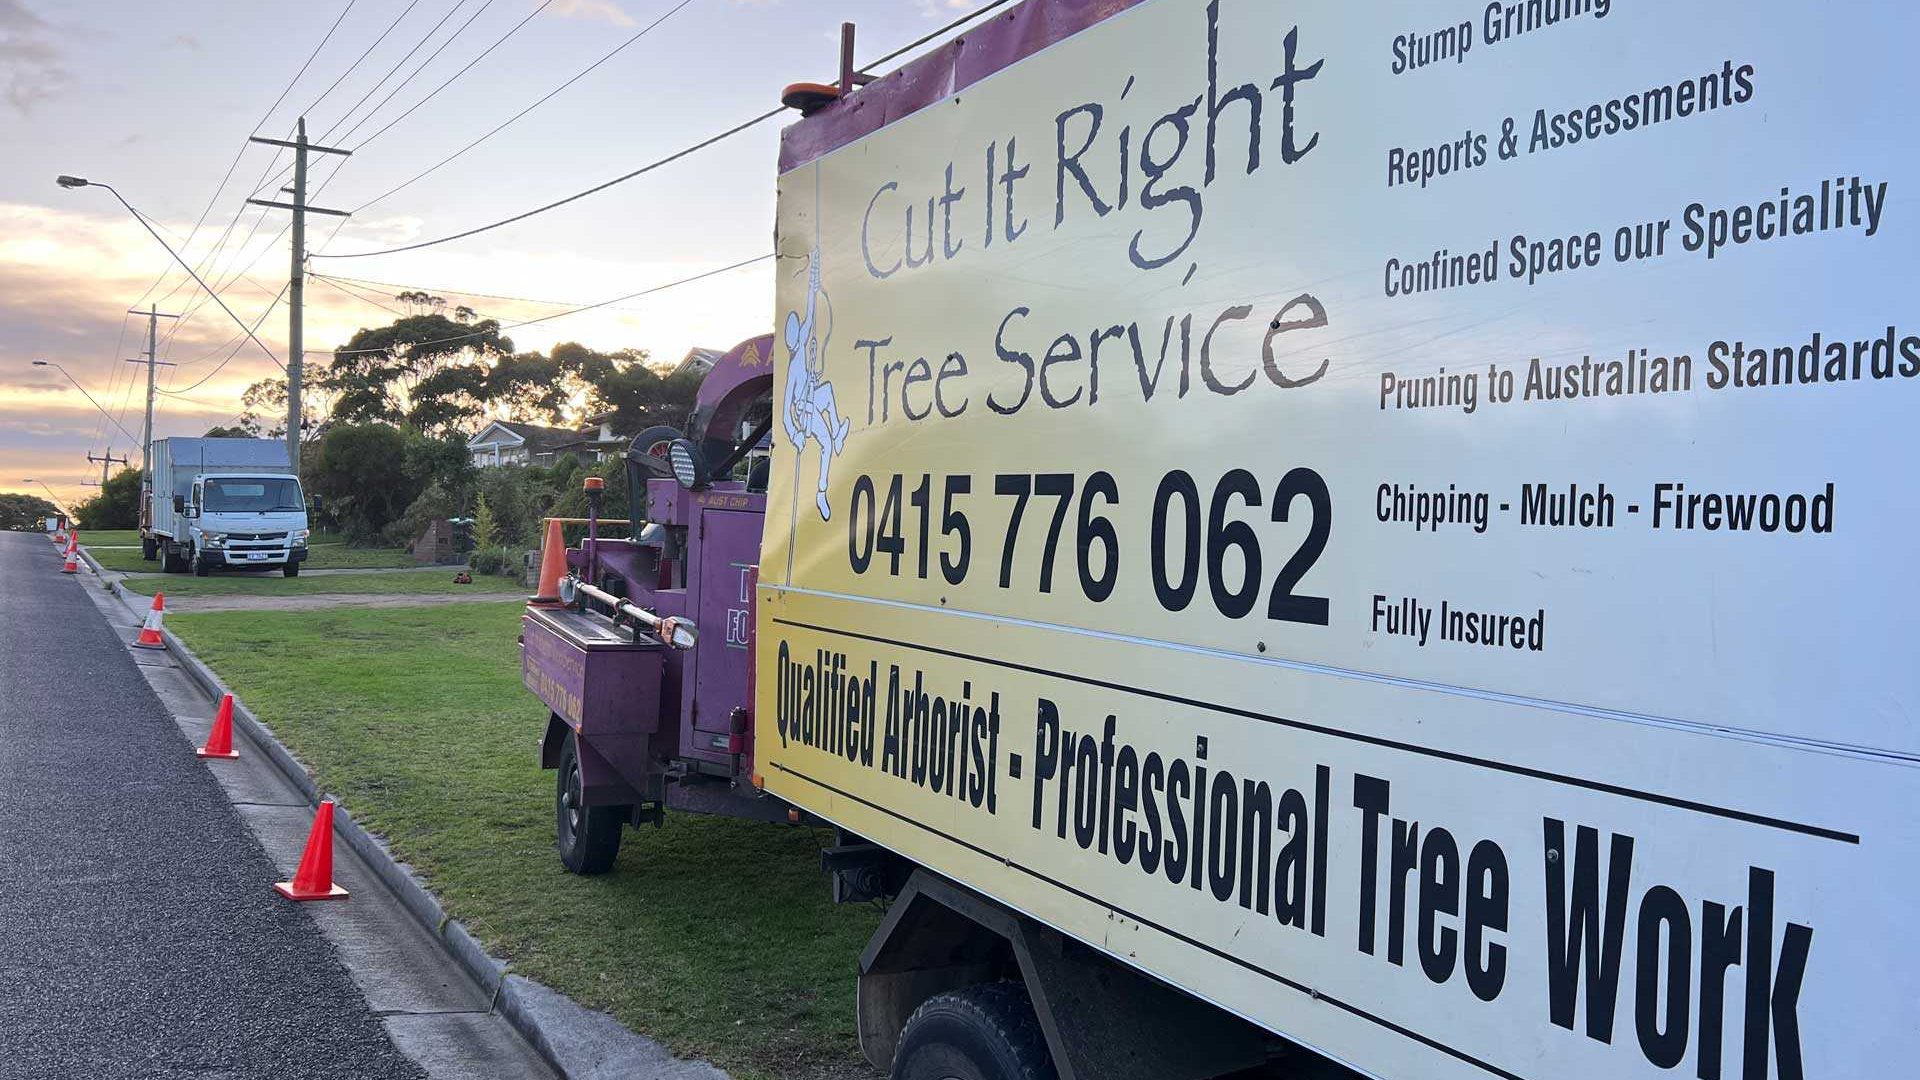 Palm Tree Pruning in Frankston: Keeping the Tropics Tidy with Cut It Right Tree Service